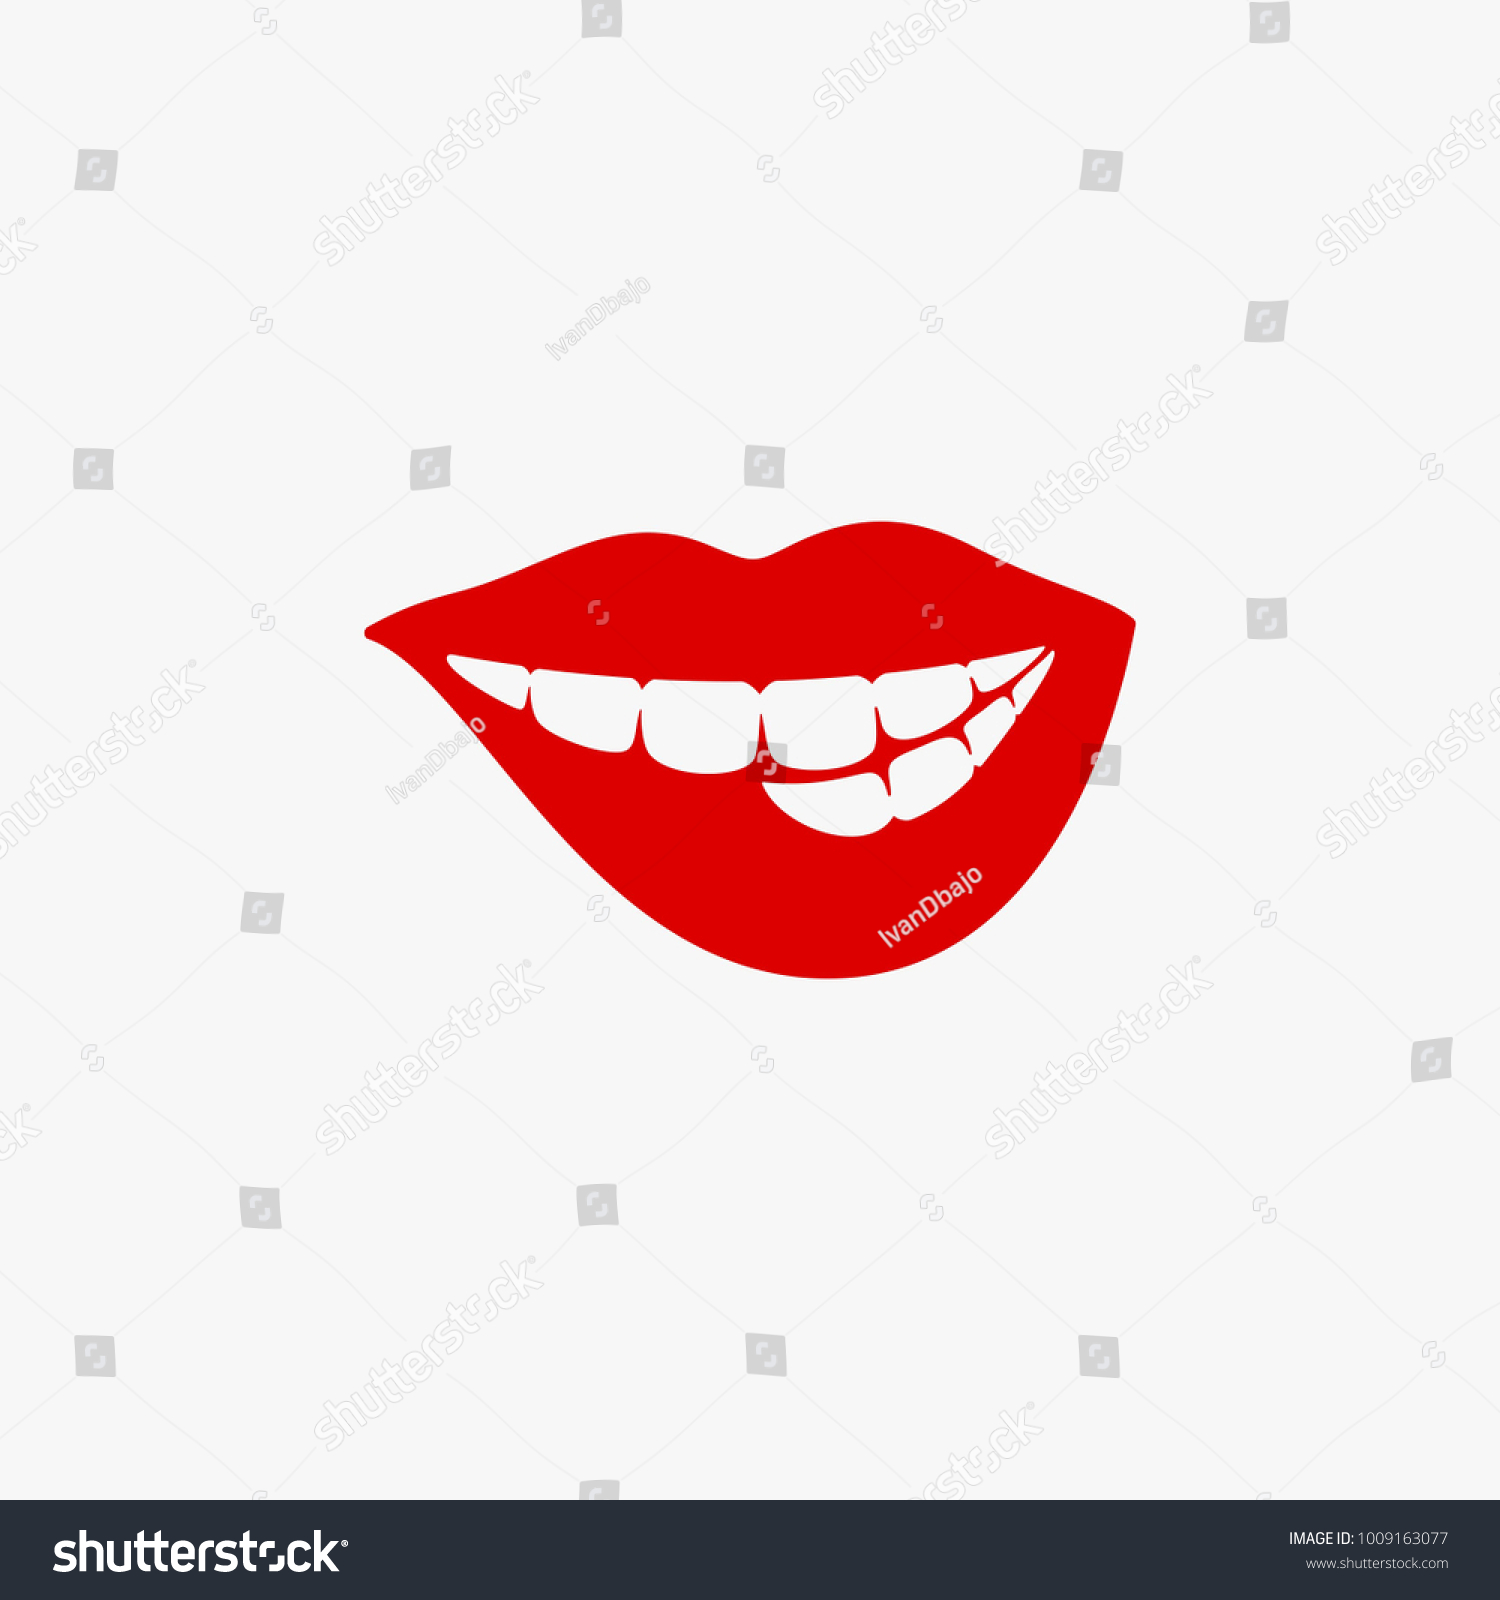 Sexy Red Lips Vector Illustration Isolated Stock Vector Royalty Free 1009163077